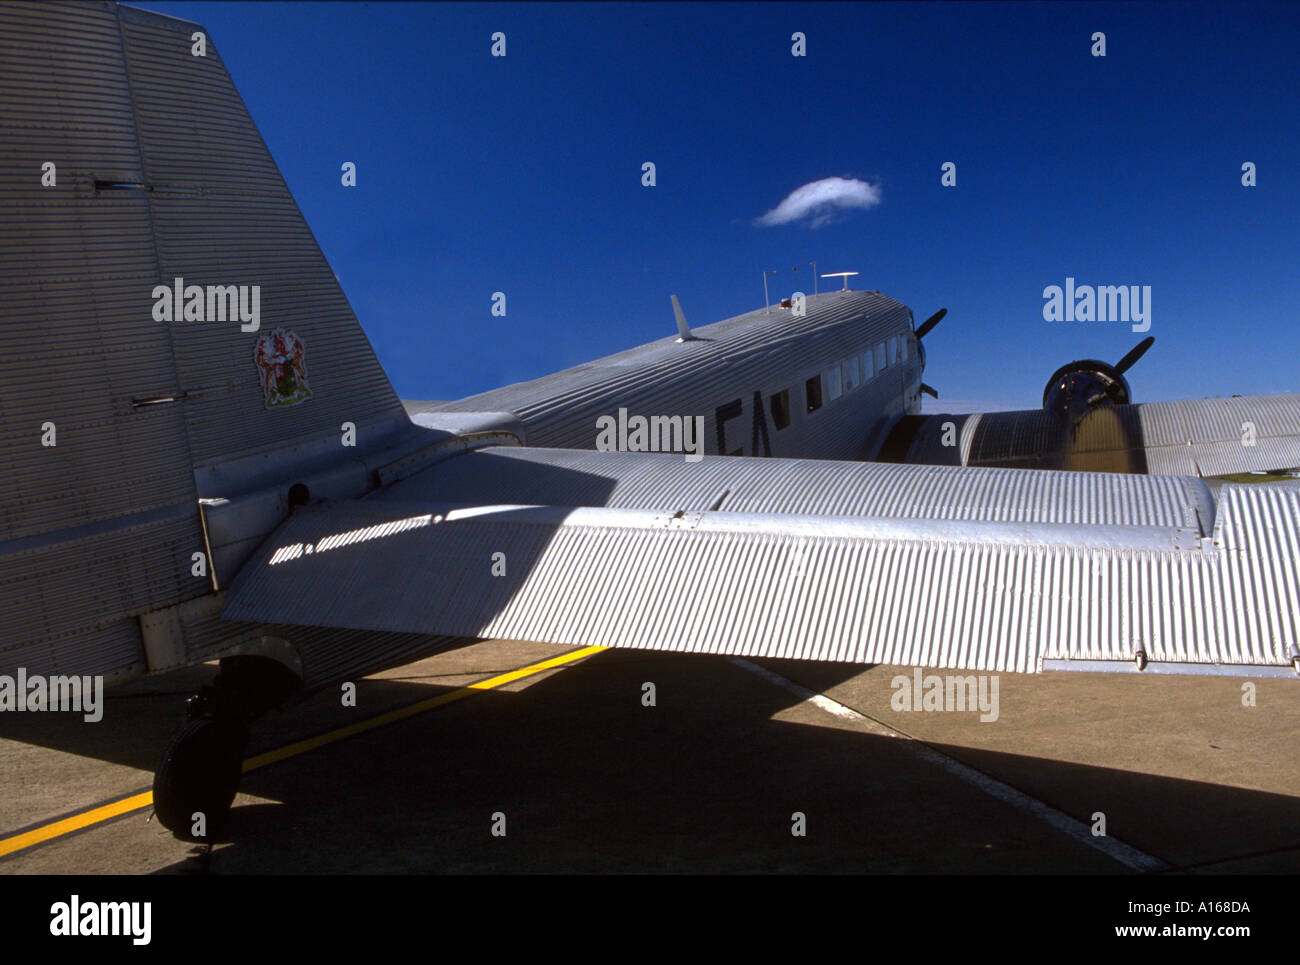 Junkers Ju 52 Flugzeug South African Airlines Stockfoto